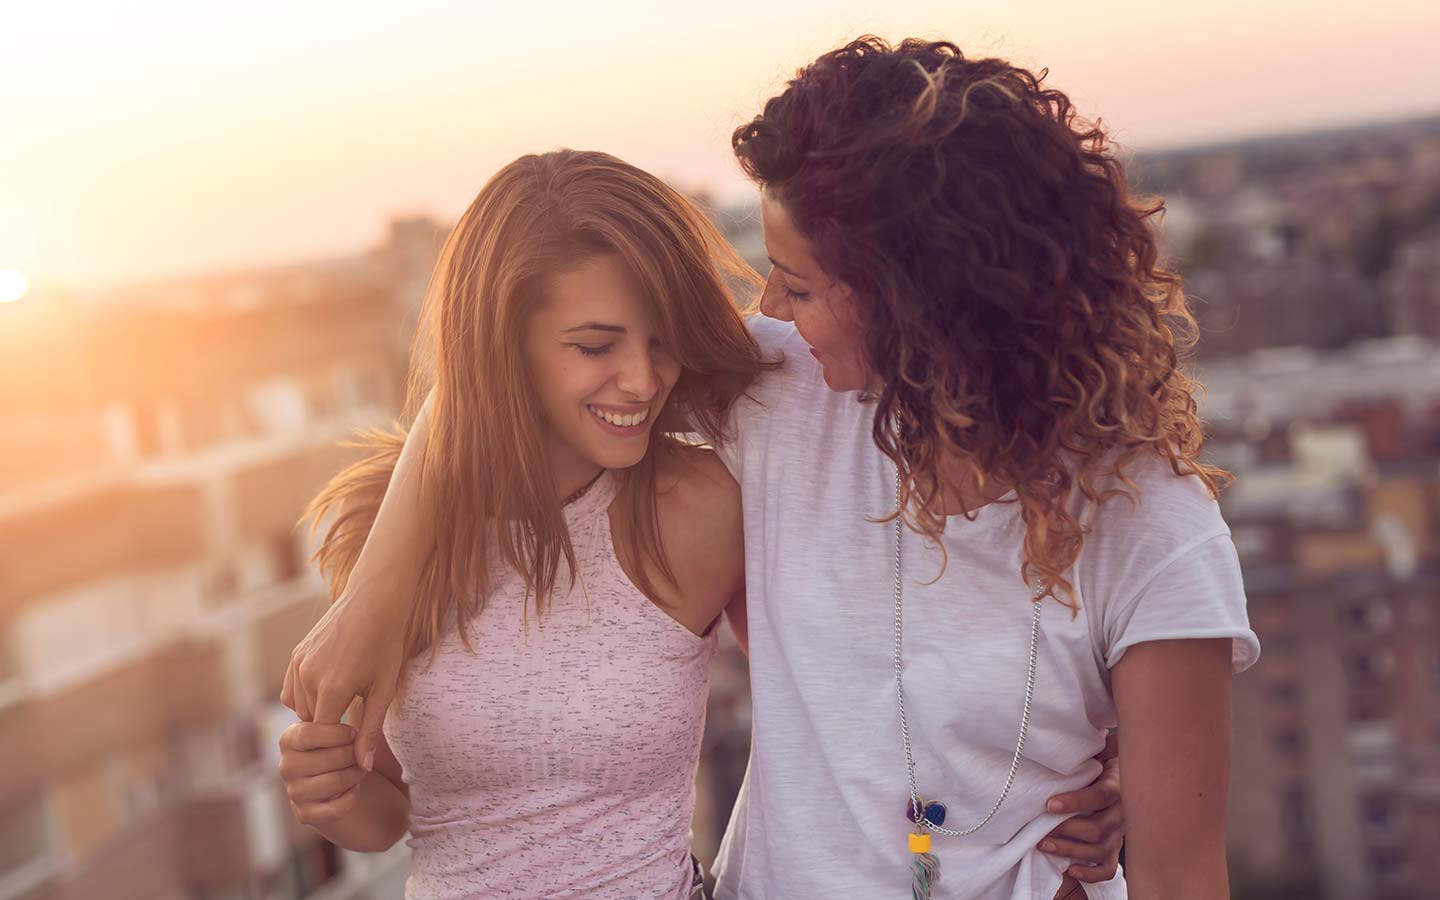 How to tell if a woman is into you as a Lesbian